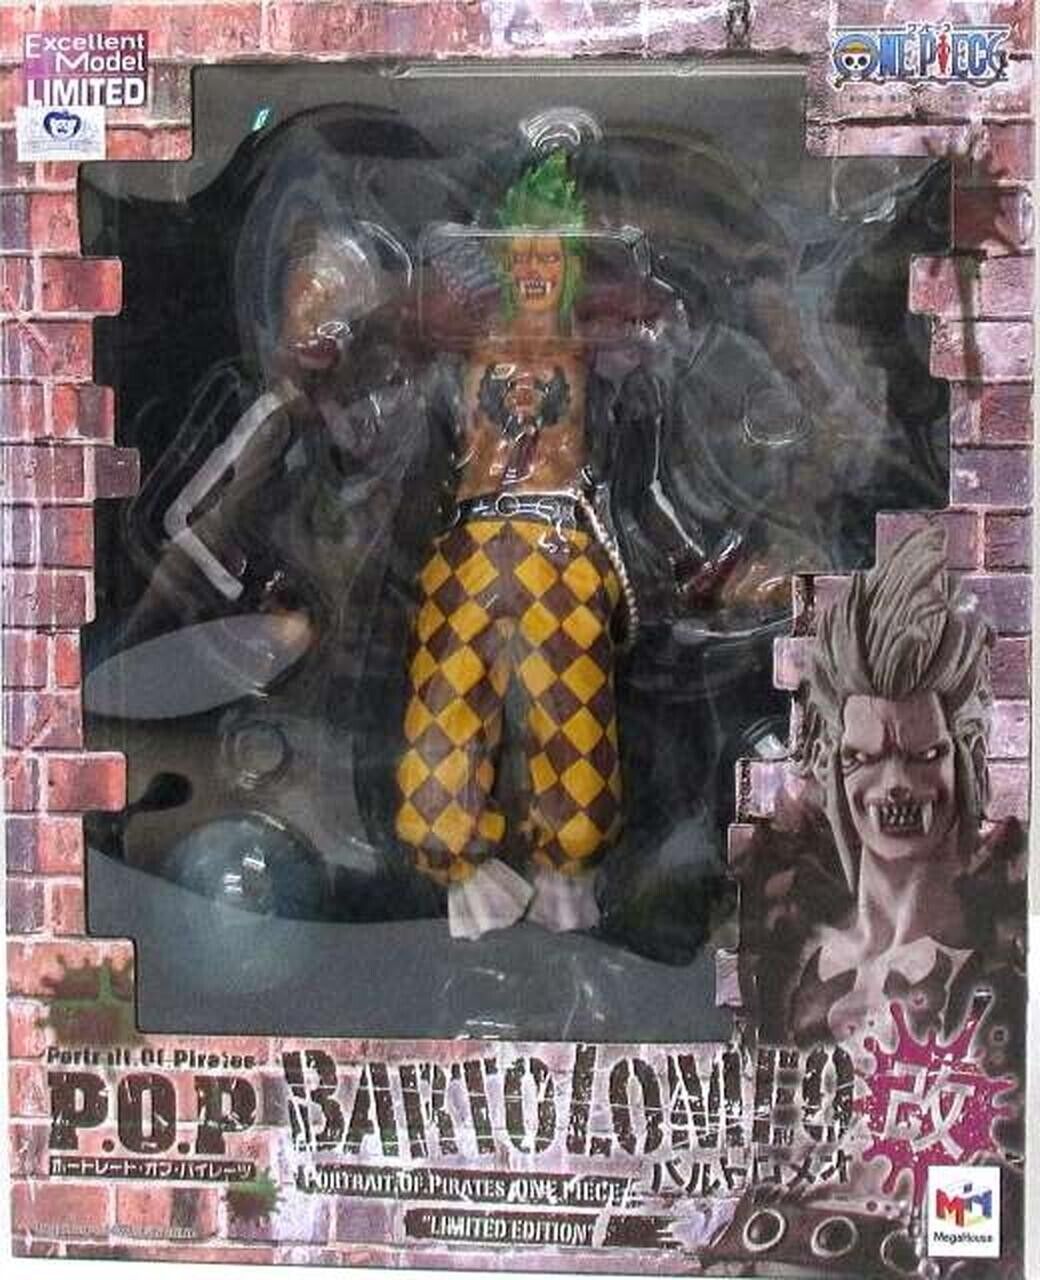 NEW One Piece Excellent Model Limited Portrait.Of.Pirates Bartolomeo from Japan